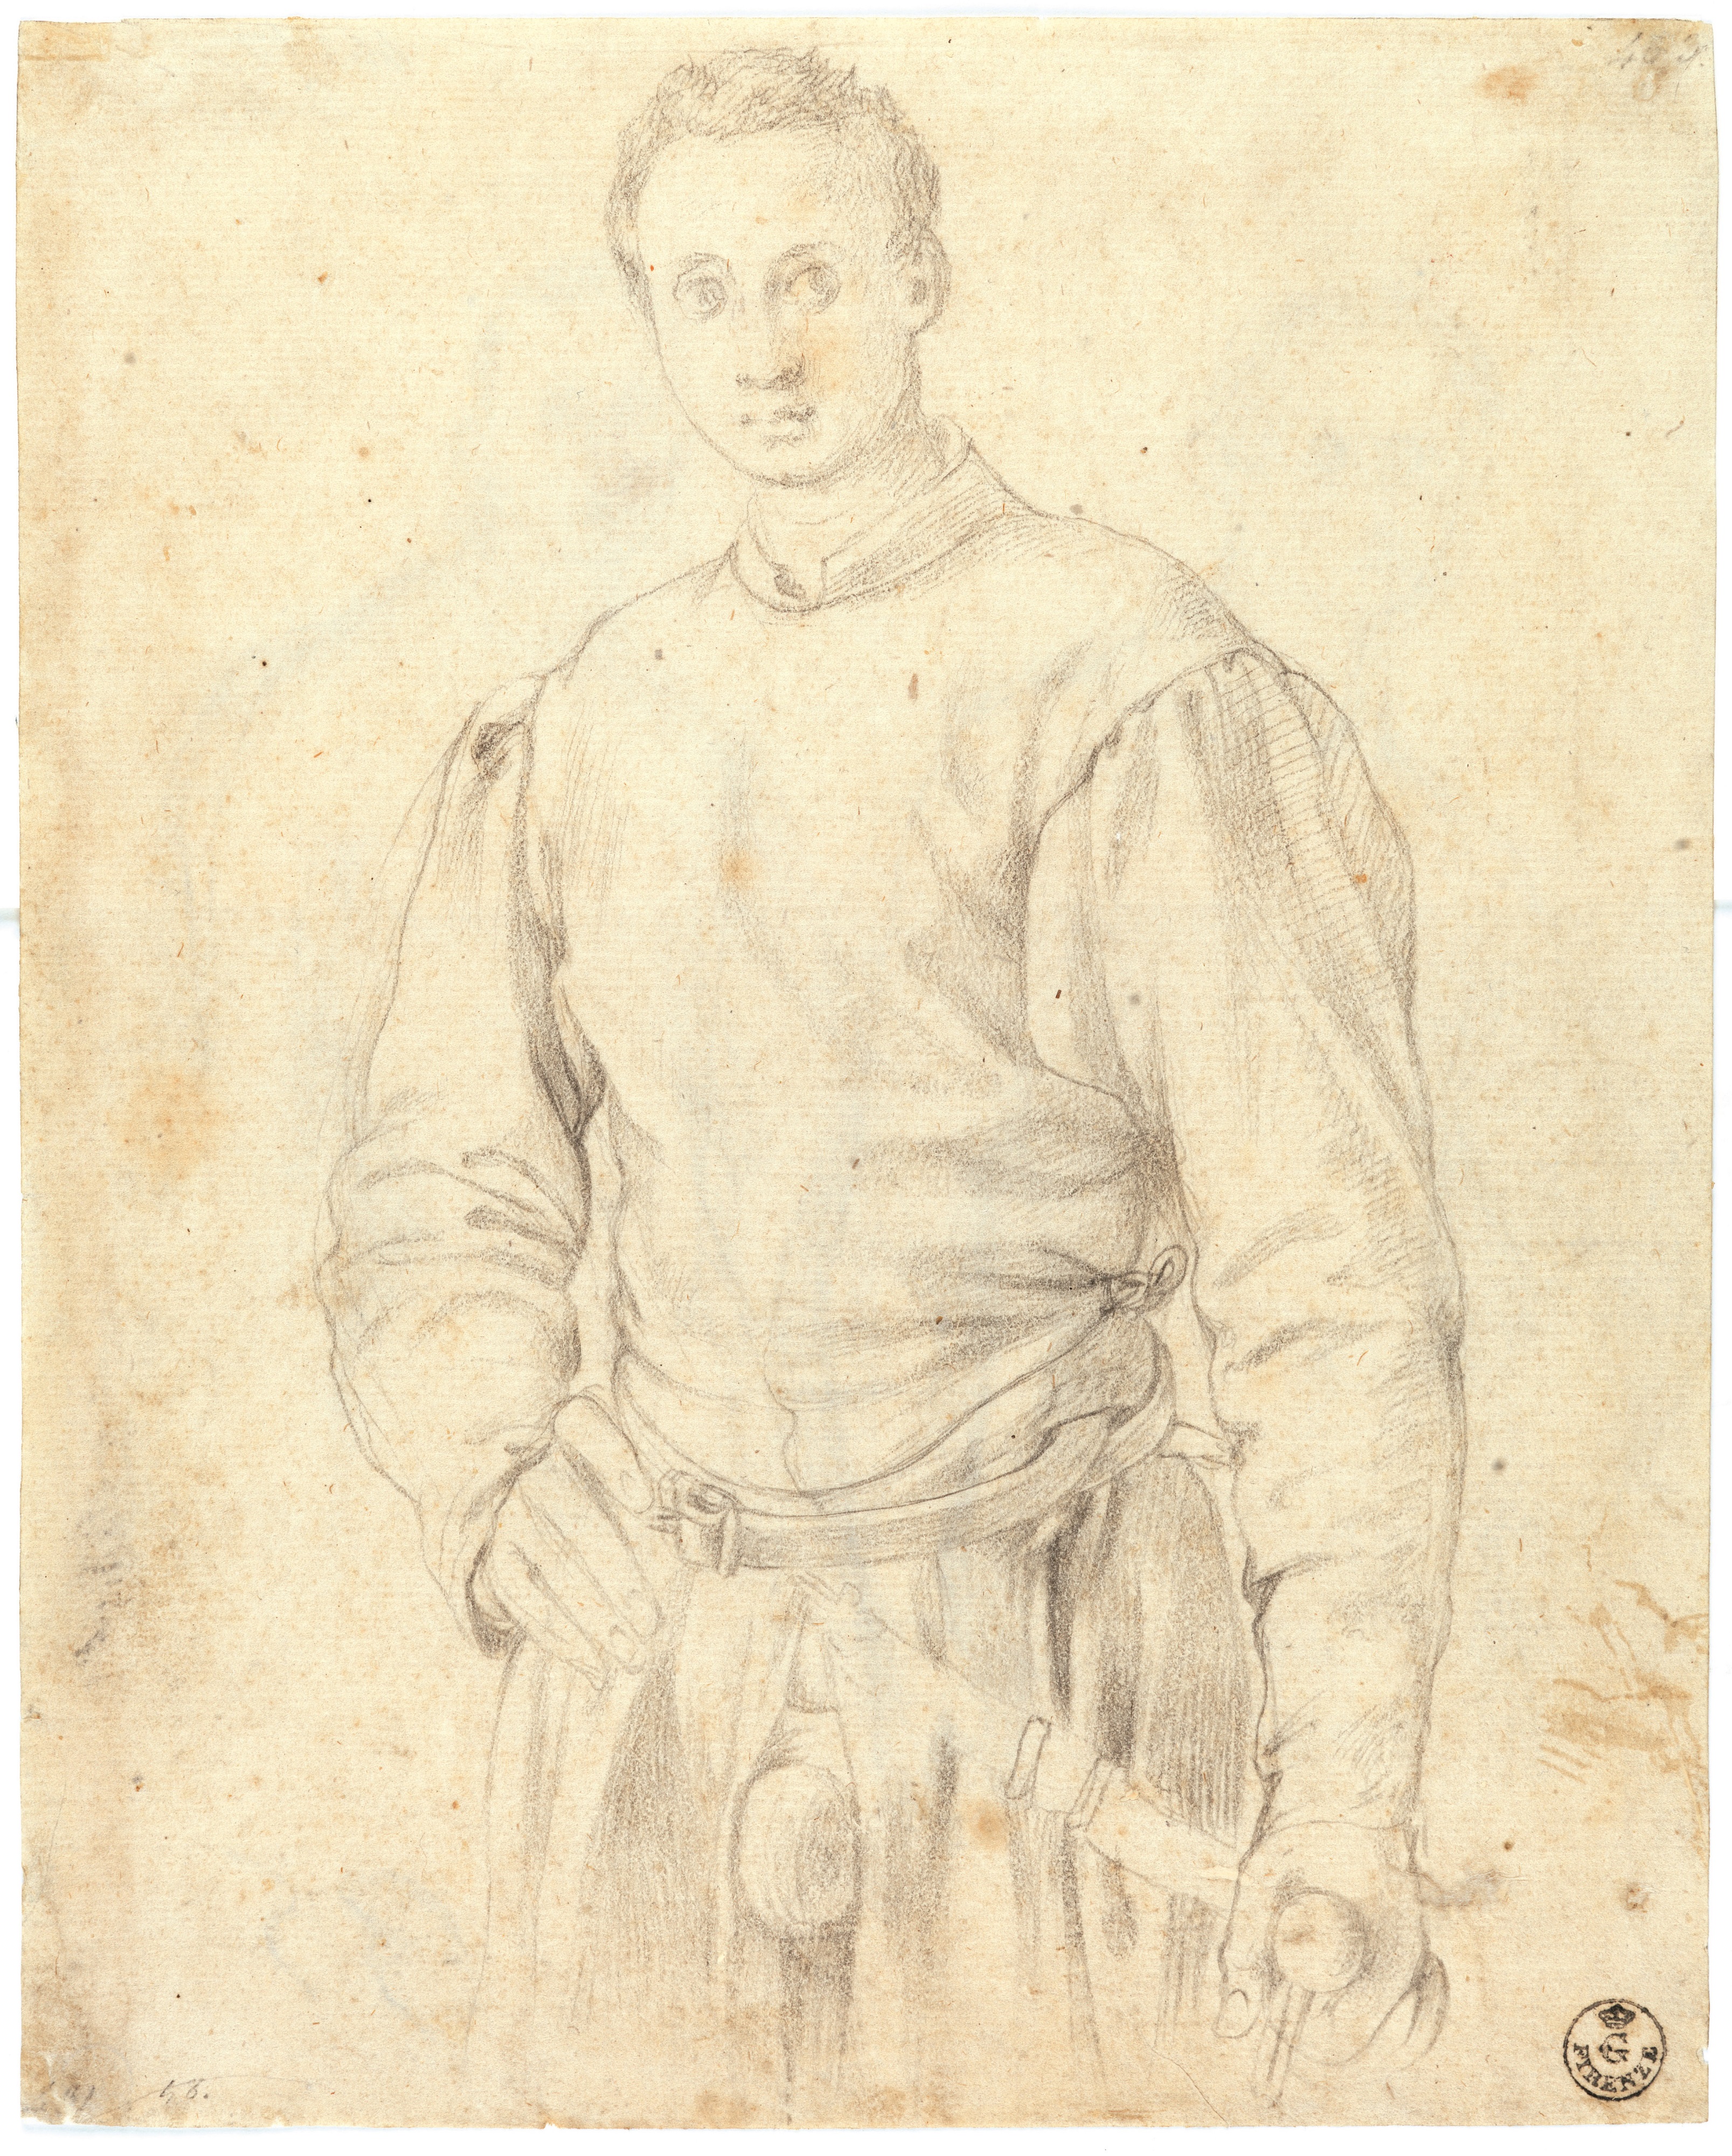 Miraculous encounters: Pontormo from drawing to painting